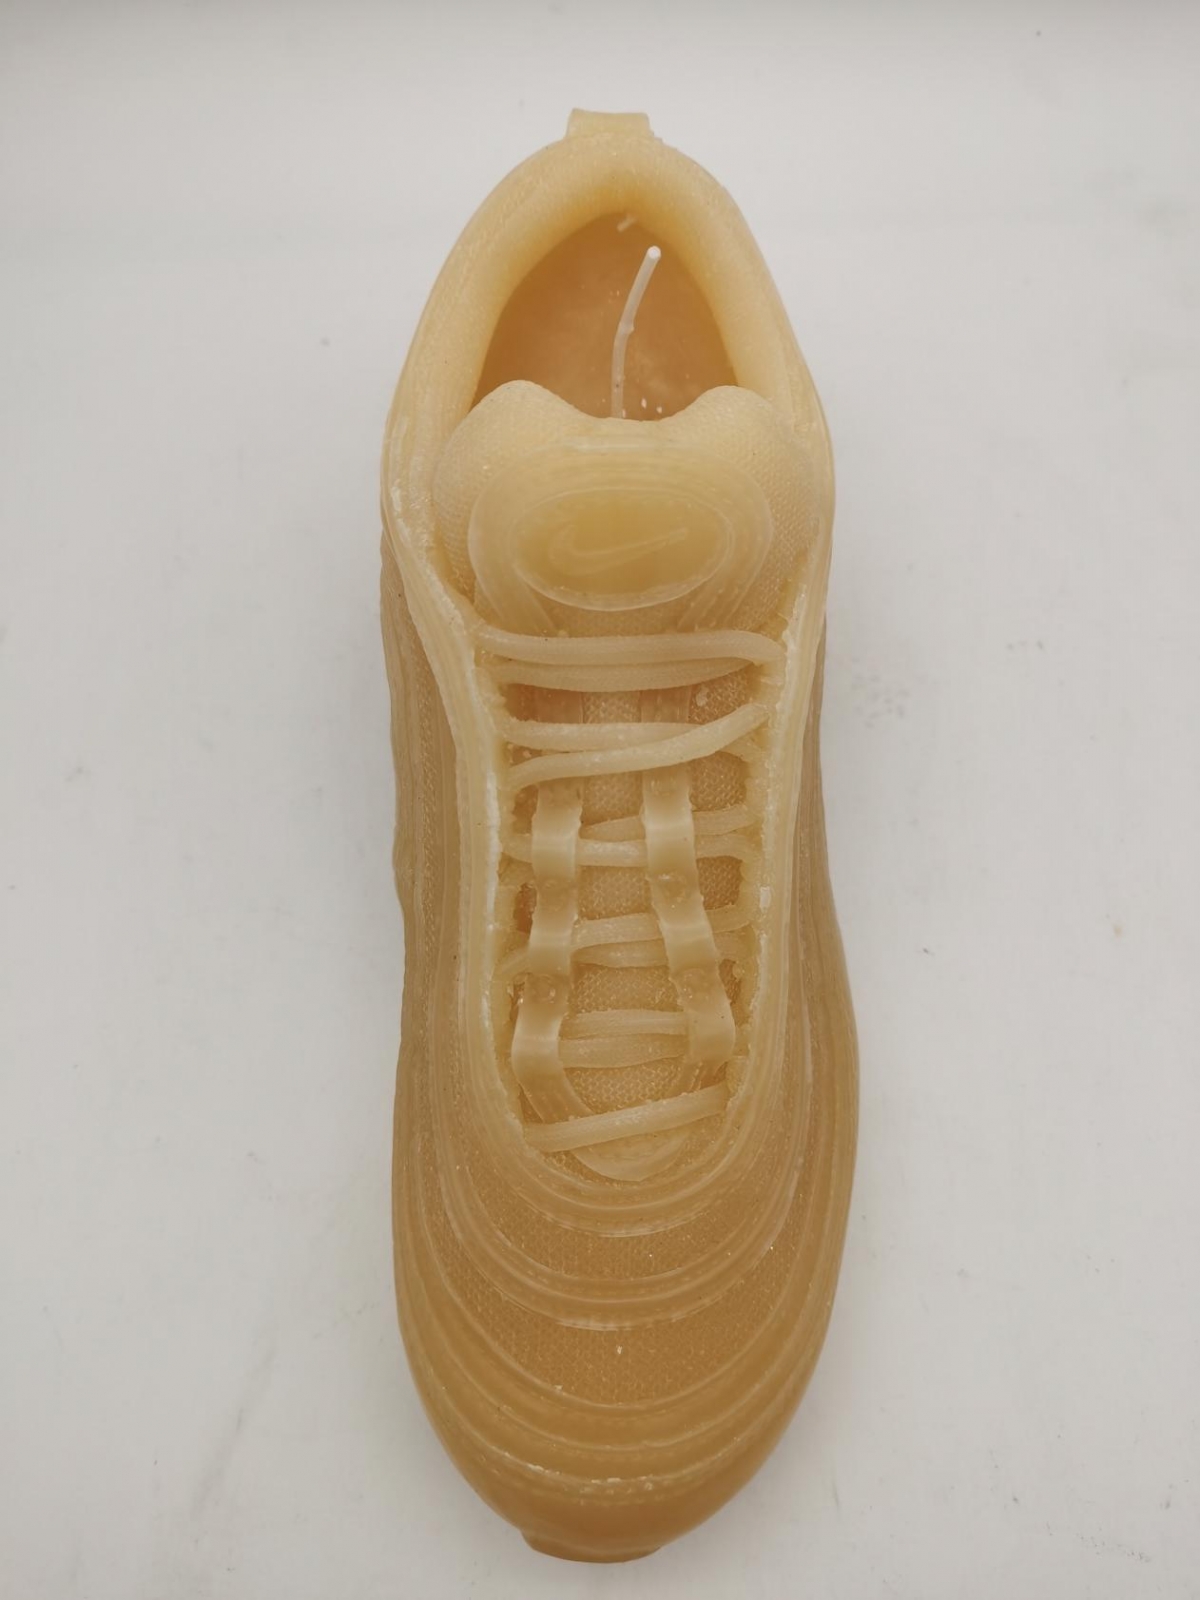 NIKE AIR MAX 97 Candles：Yellow Beeswax,Essential Oils,1 to 1 Simulation Sculpture,Scented Candles, Sneaker Candle, Trainer Candle, Shoes Candle,In Gift Box,China Factory,Best Price-HOWCANDLE-Candles,Scented Candles,Aromatherapy Candles,Soy Candles,Vegan Candles,Jar Candles,Pillar Candles,Candle Gift Sets,Essential Oils,Reed Diffuser,Candle Holder,